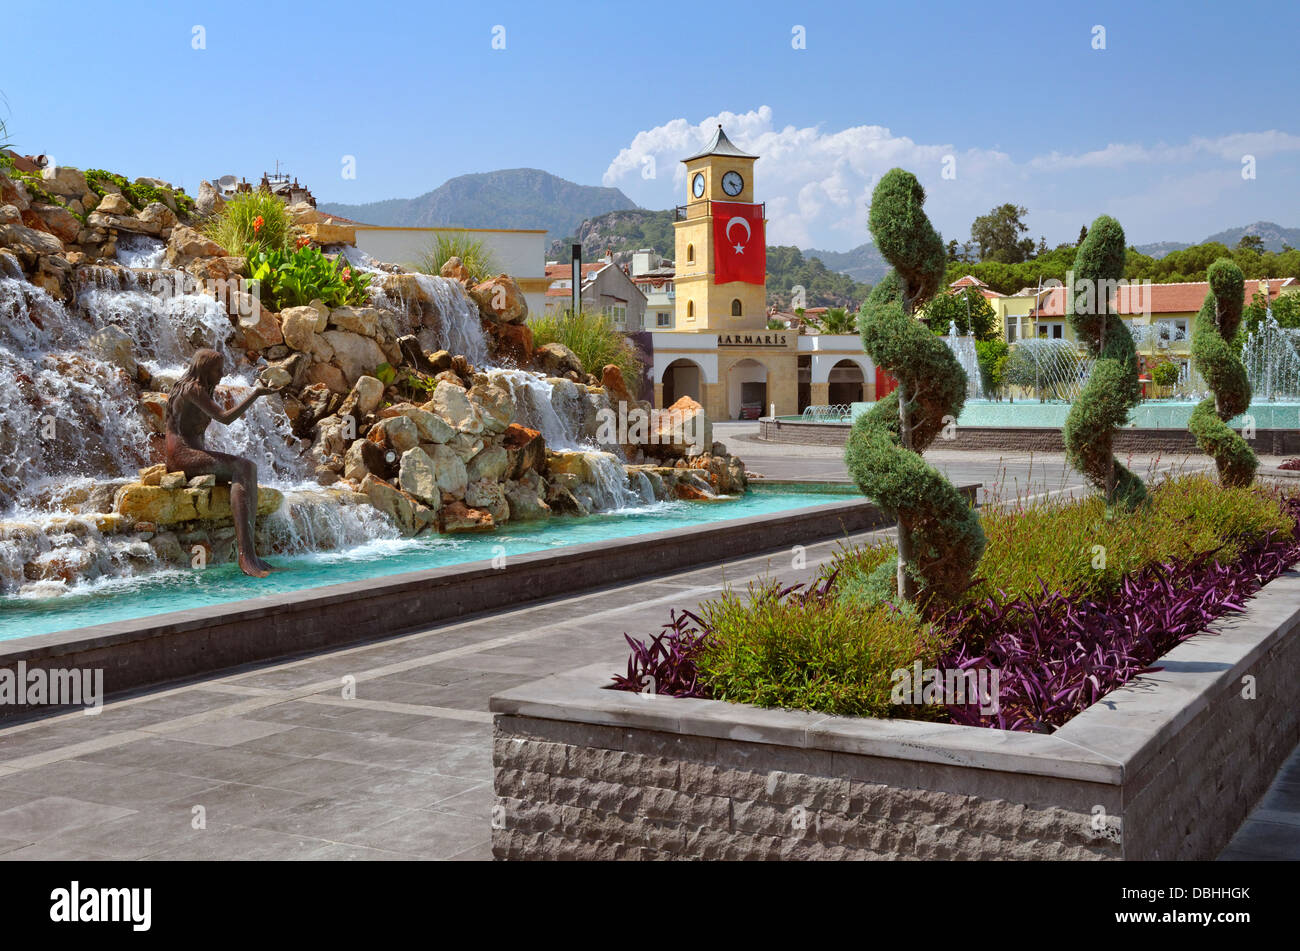 The new Marmaris town square with fountains. Mugla Province, Turkey. Built 2012. Stock Photo